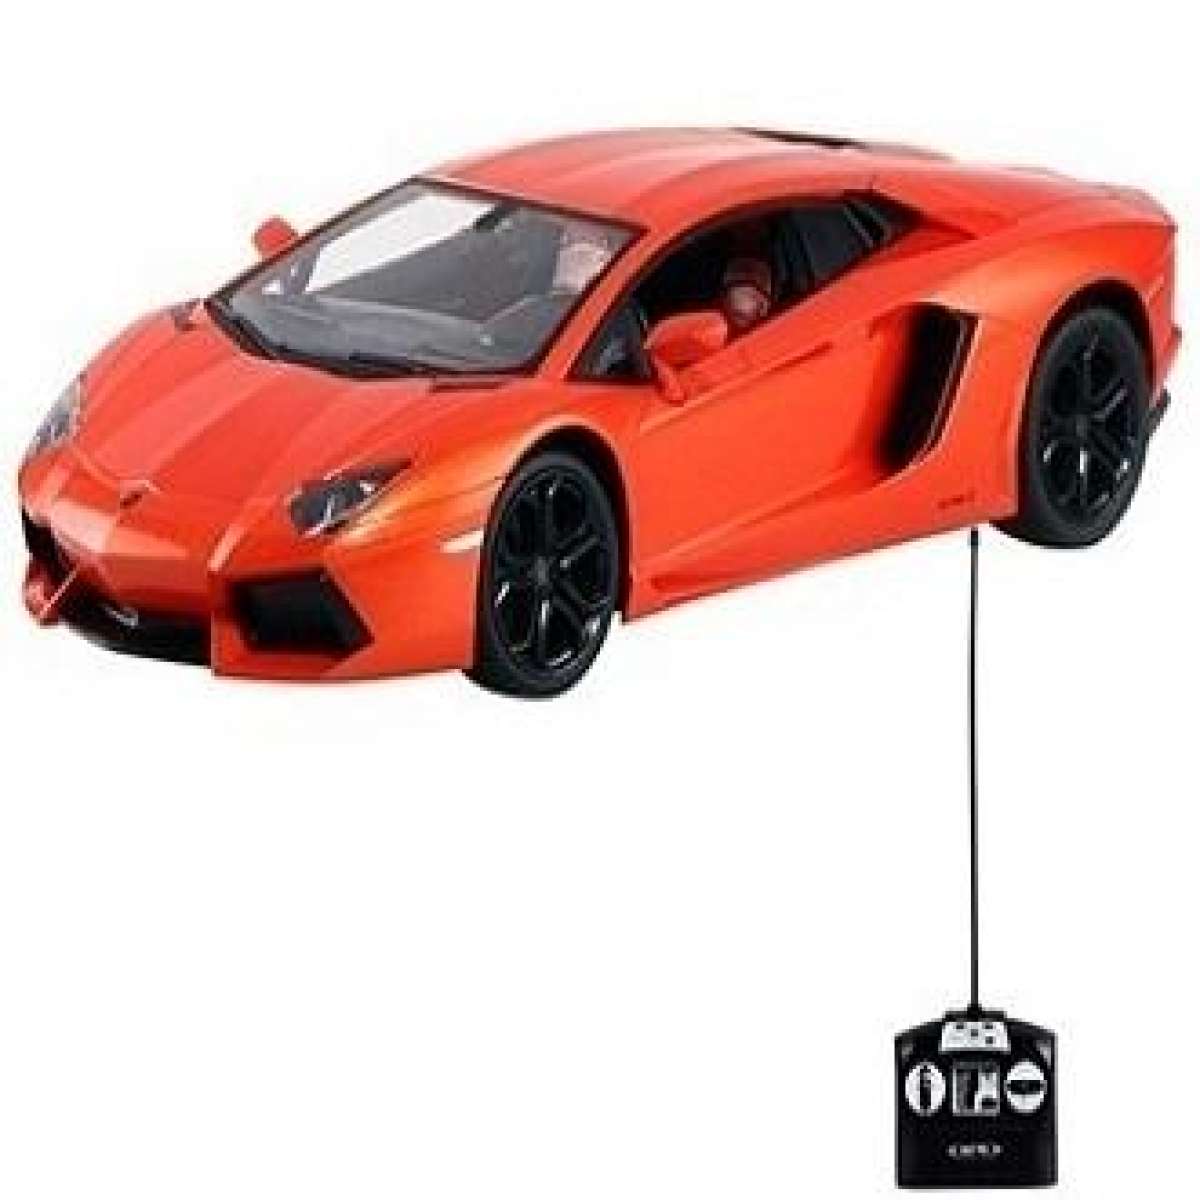 remote car red